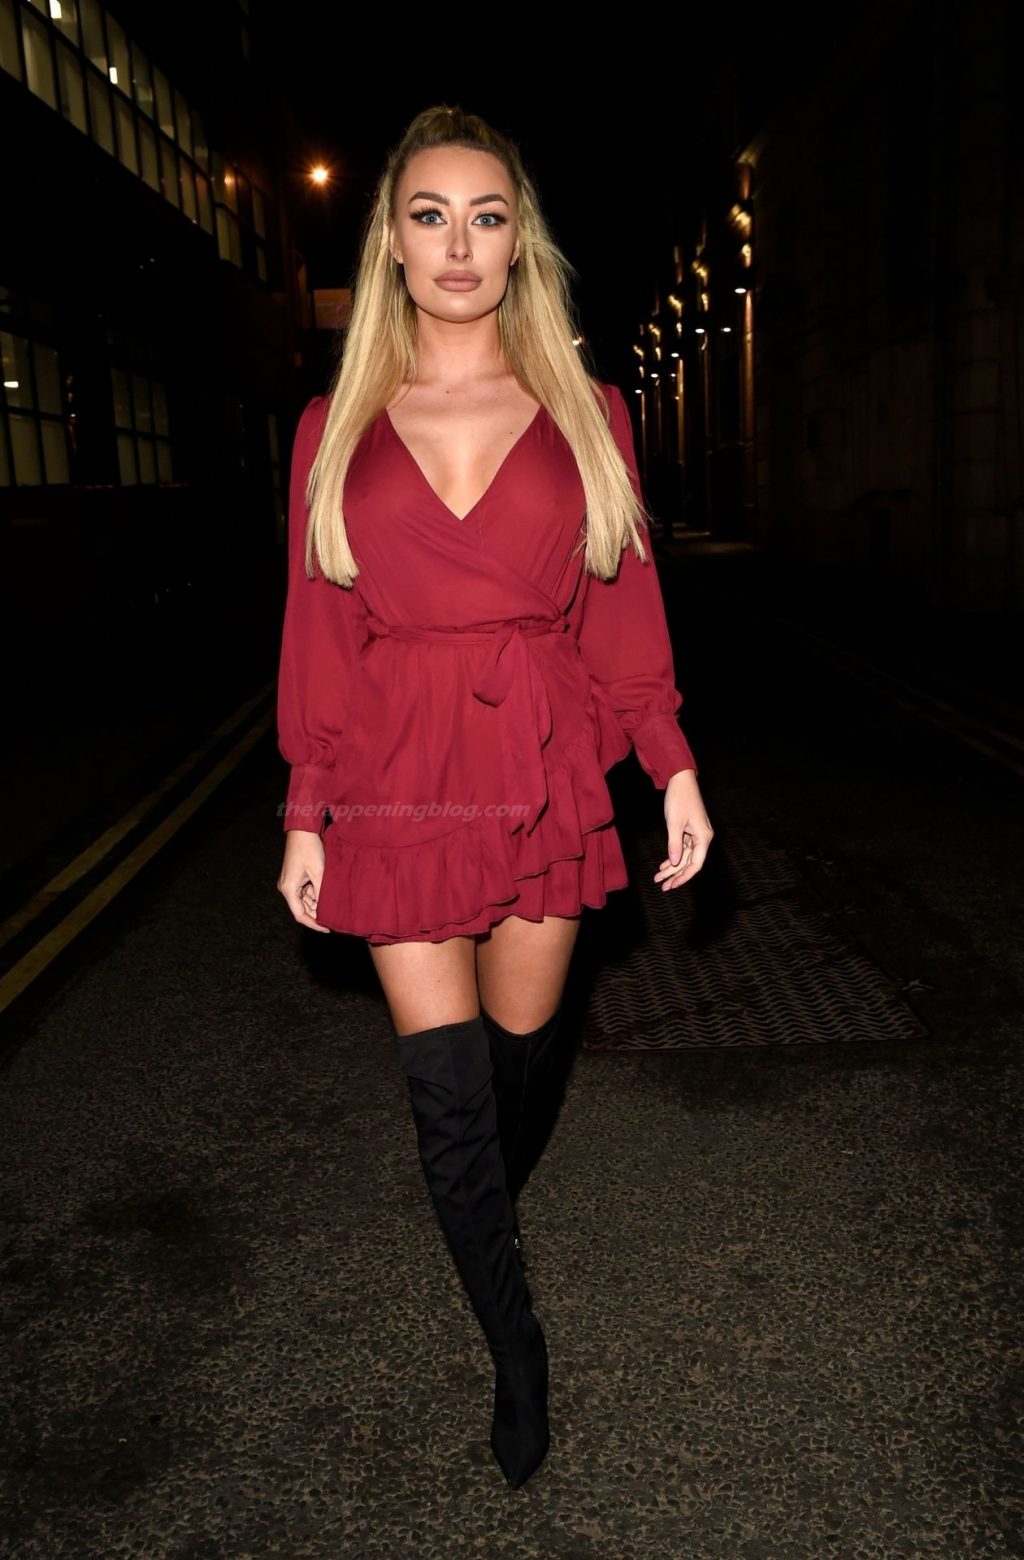 Sexy Chloe Crowhurst is Seen Leaving a Studio in Leeds (27 Photos)